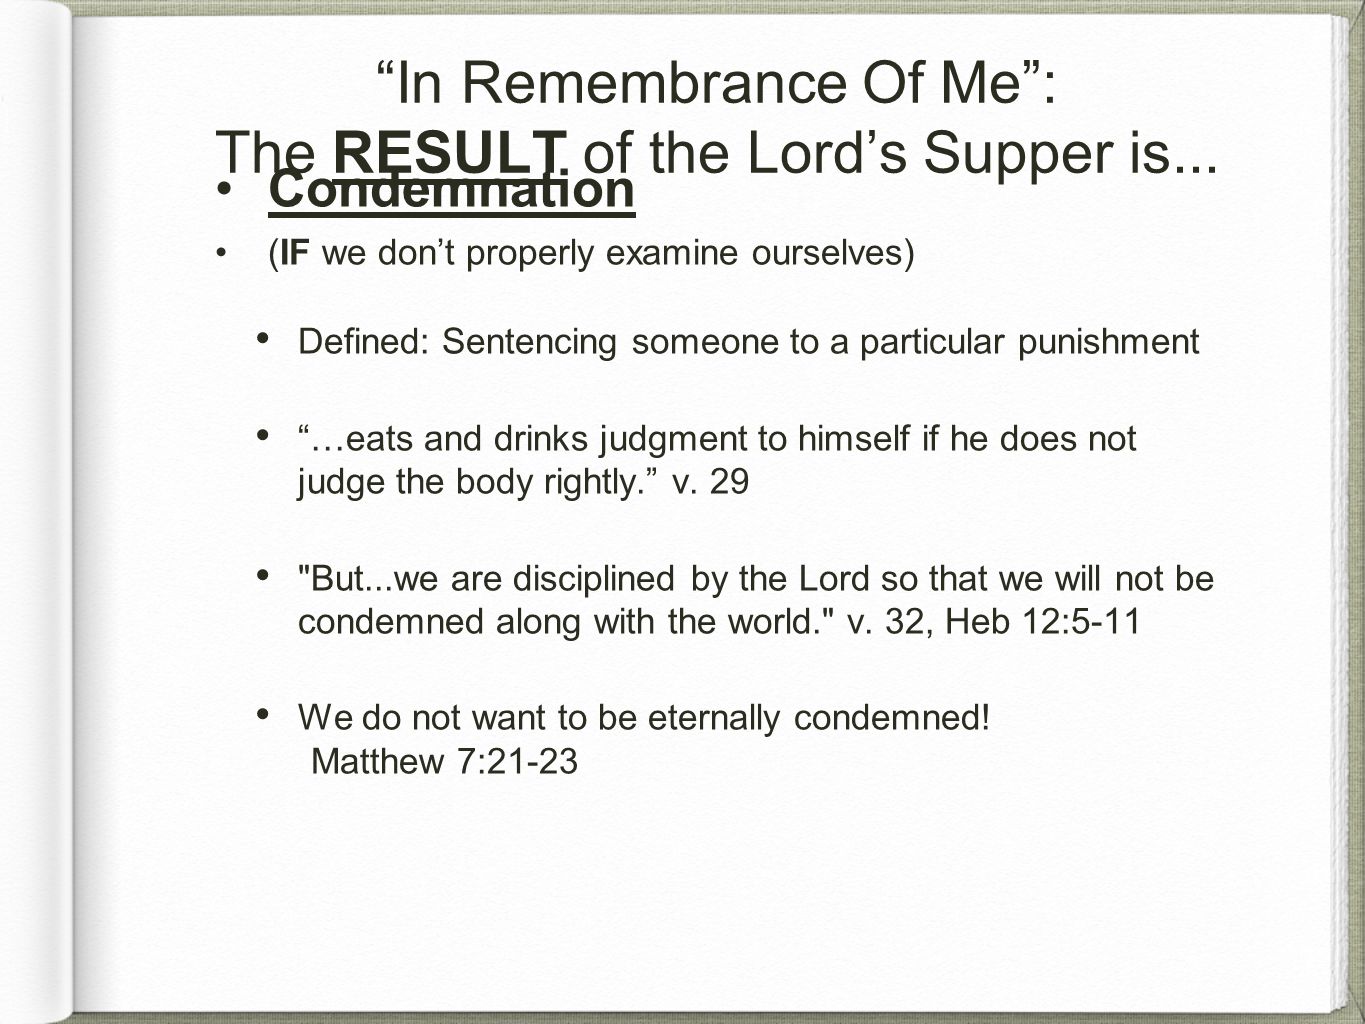 In Remembrance Of Me : The RESULT of the Lord’s Supper is...